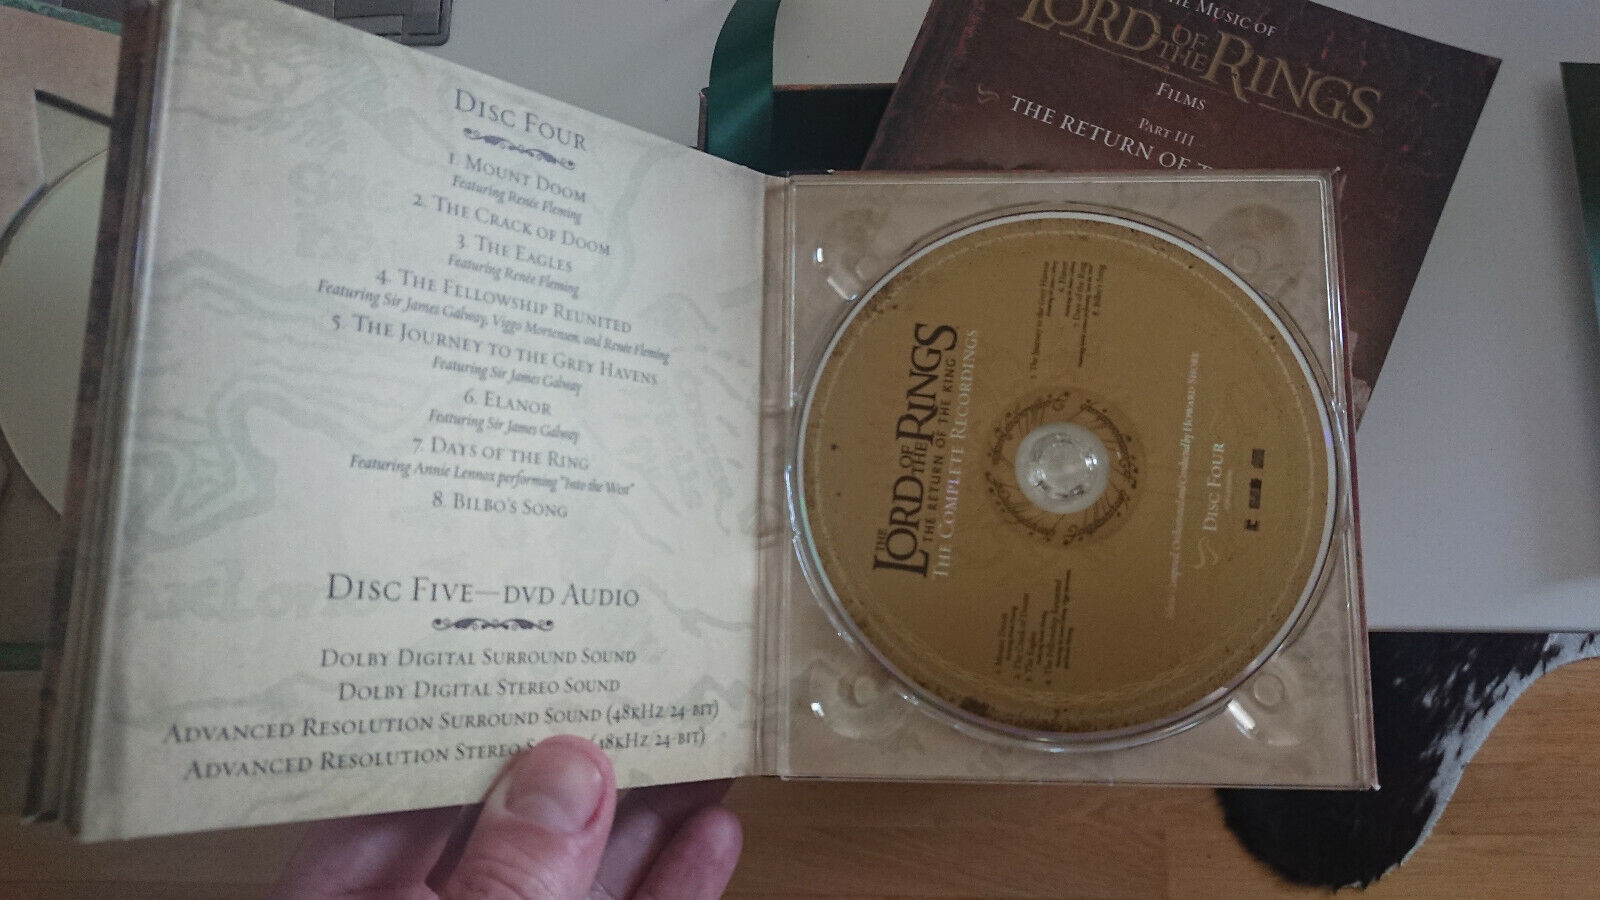 The Lord Of The Rings - The Return Of The King - The Complete Recordings (2007)